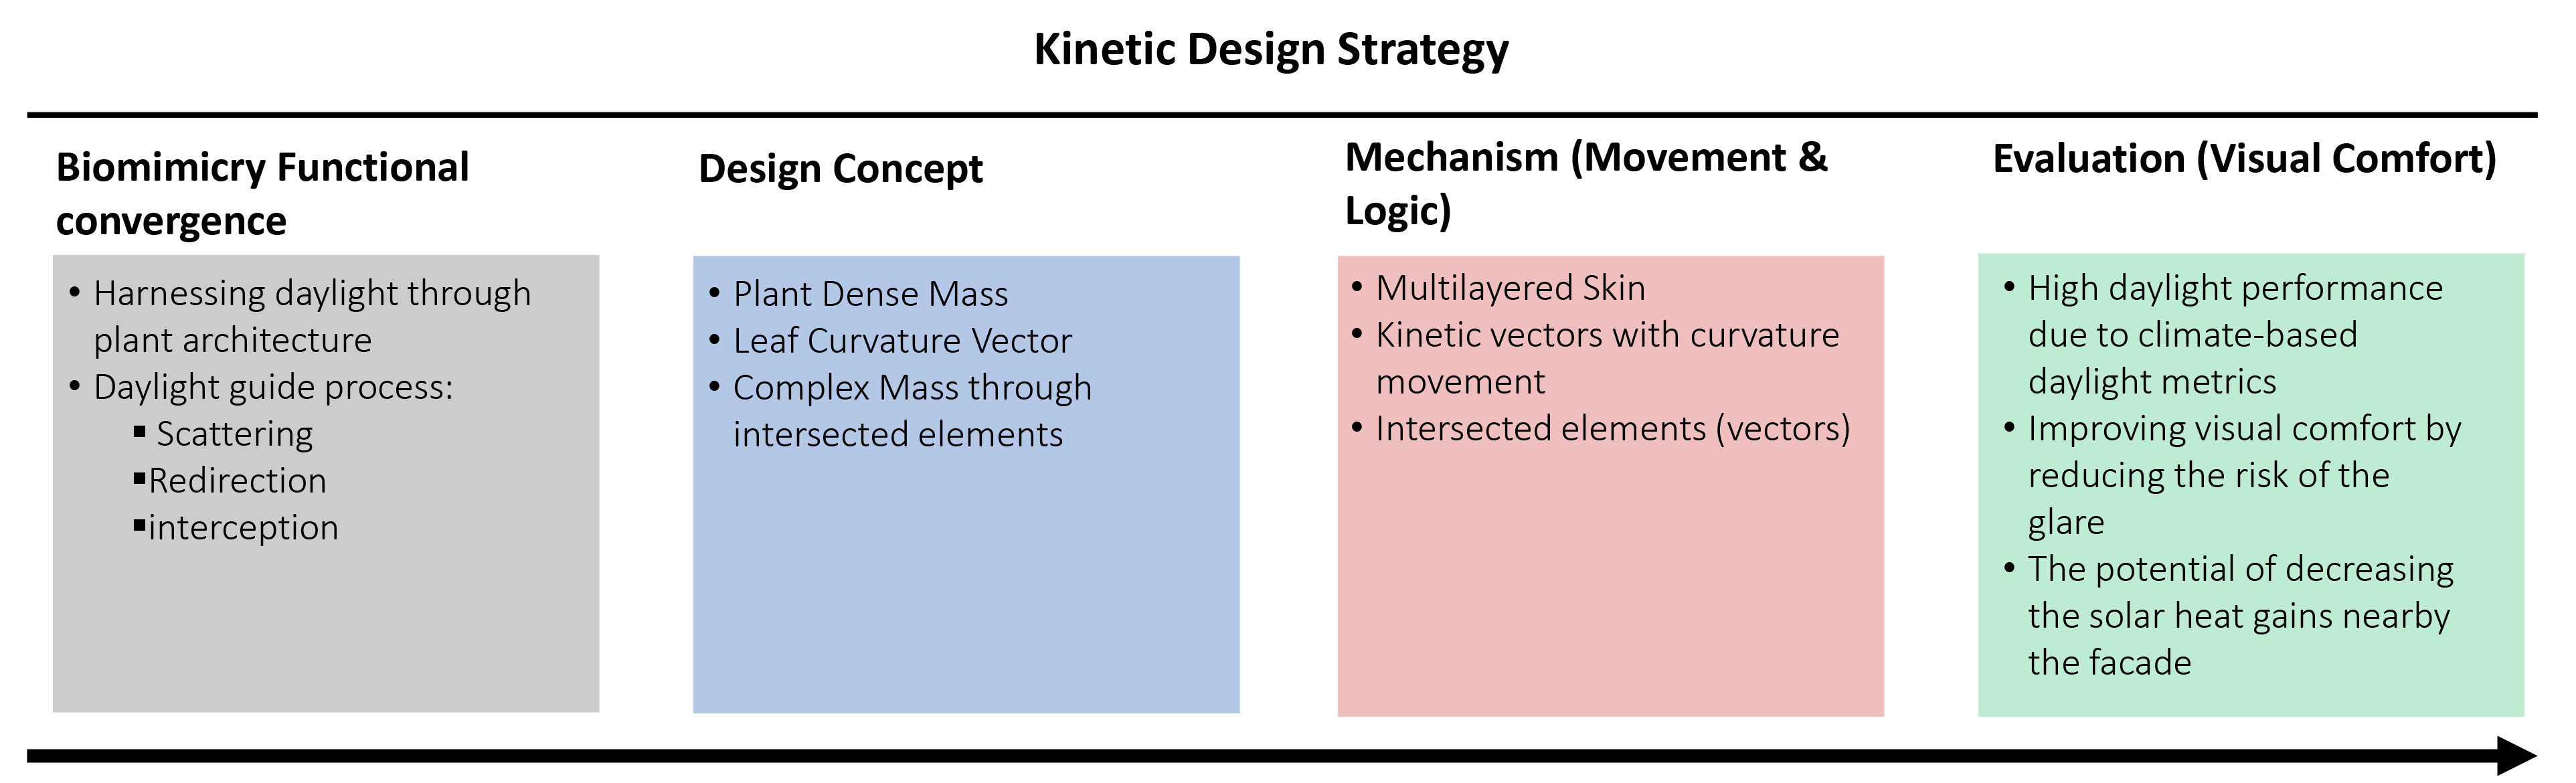 Kinetic design strategy procedure through biomimicry functional-morphological approach.